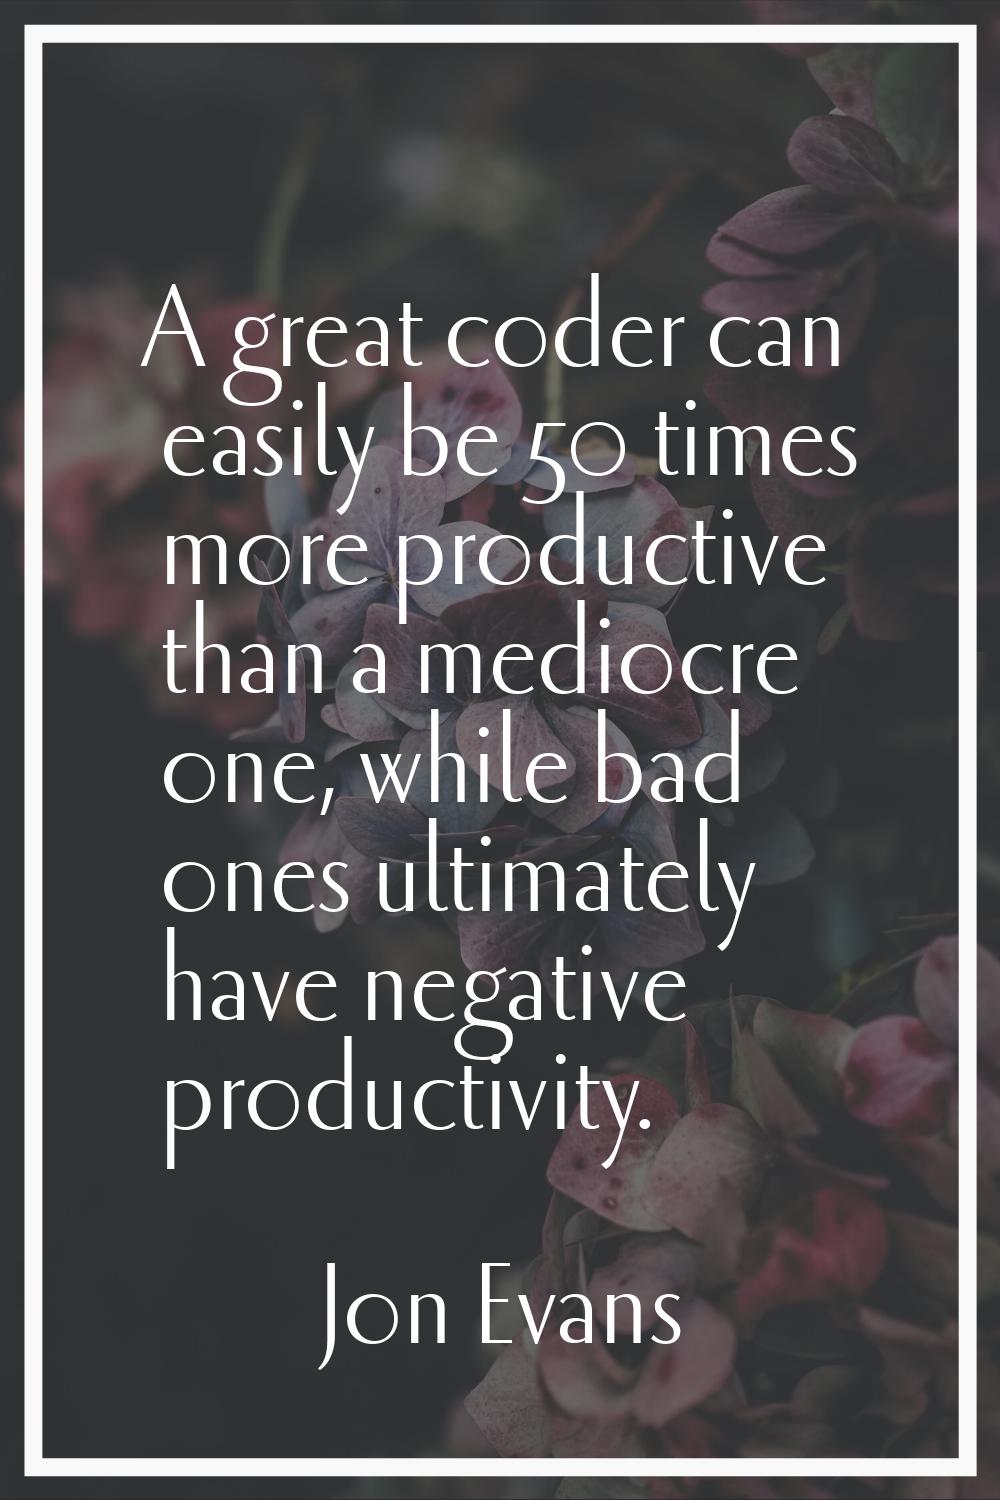 A great coder can easily be 50 times more productive than a mediocre one, while bad ones ultimately